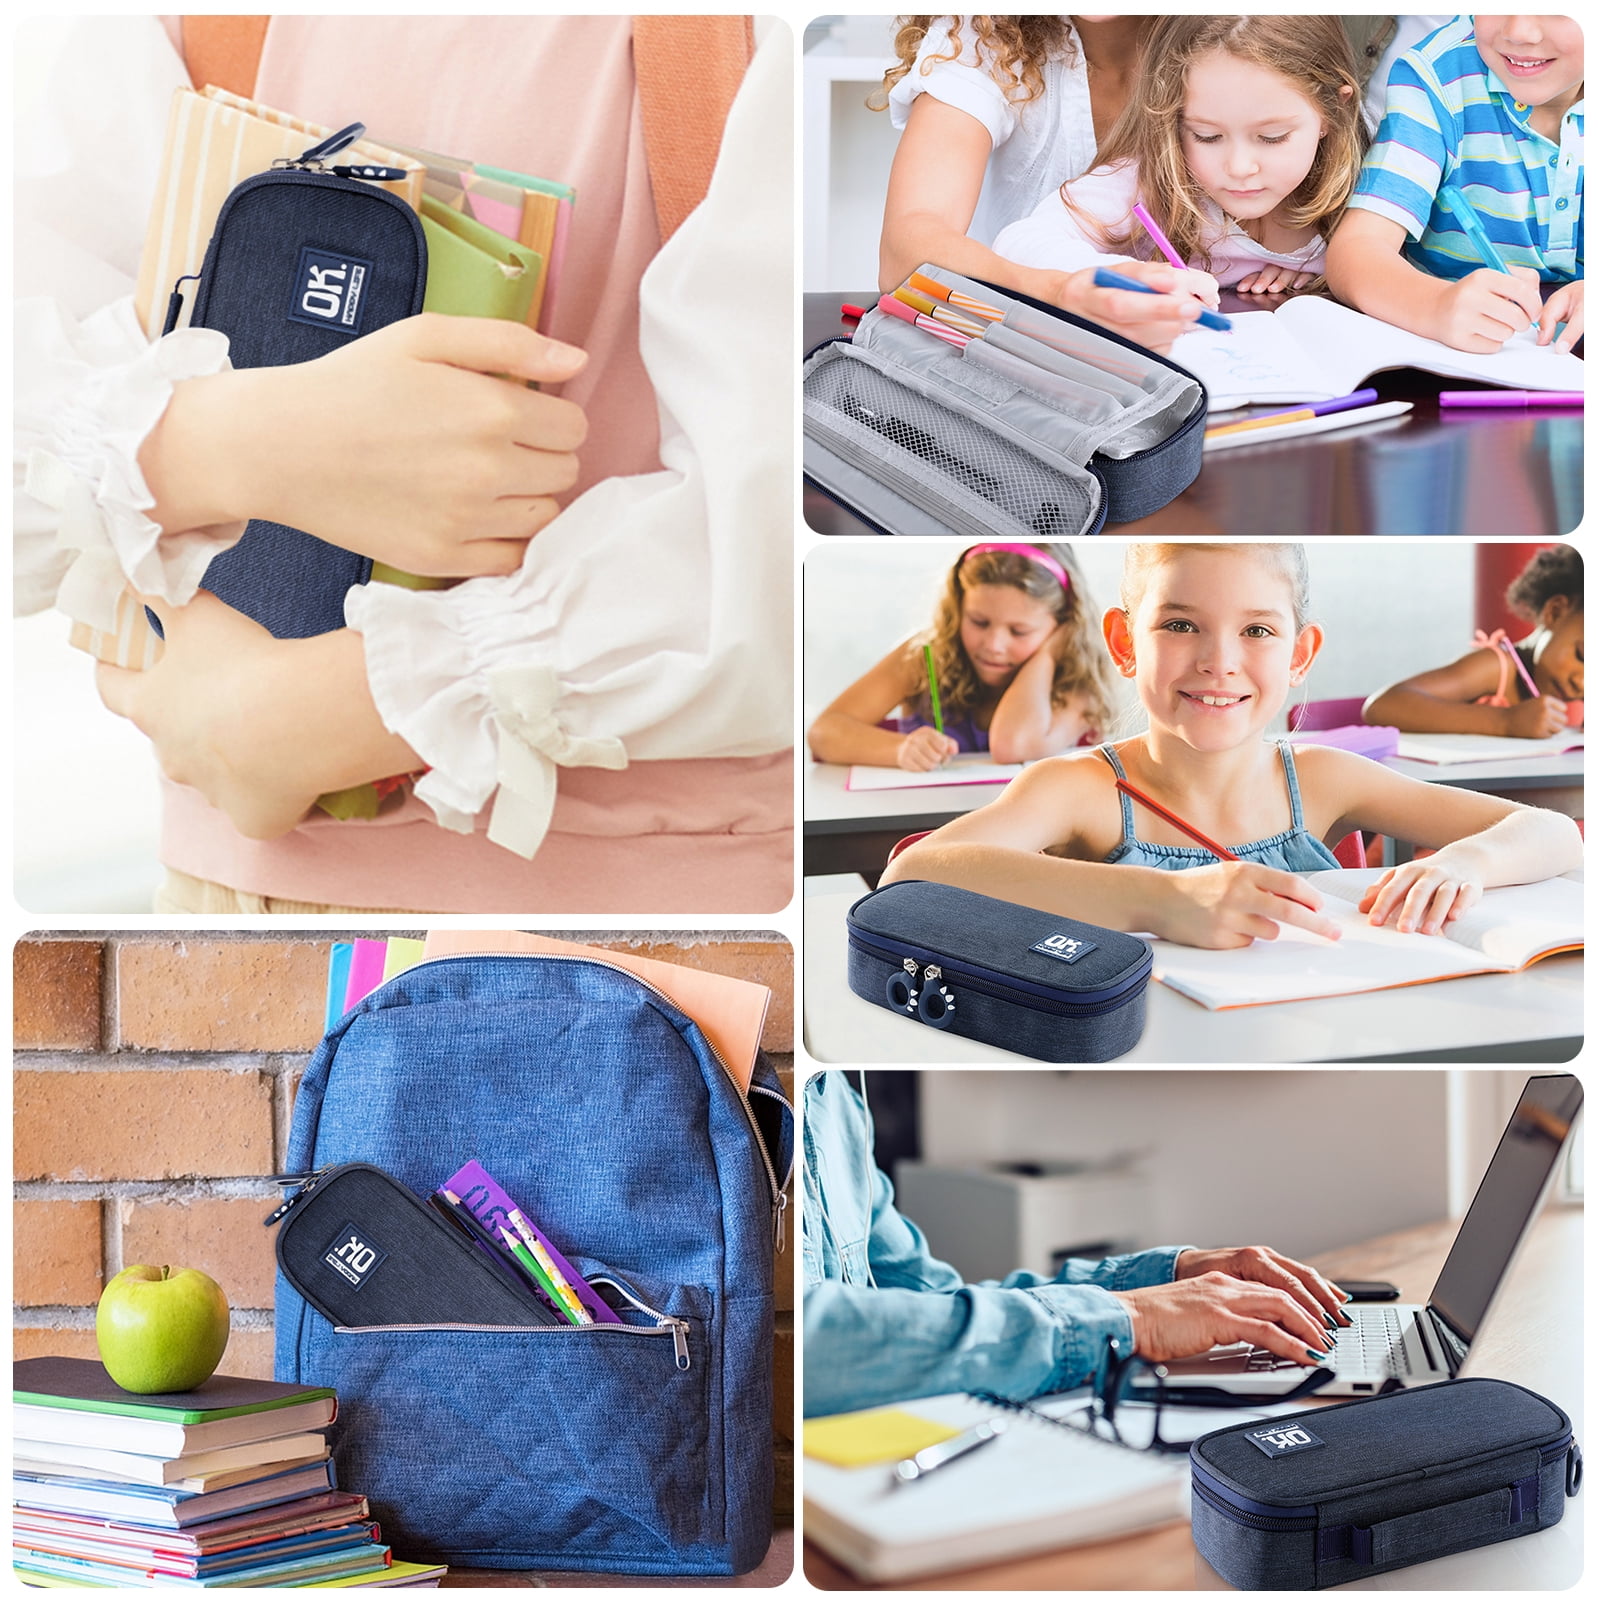 Emelivor Dolphins Pencil Case Big Capacity Pencil Pouch Pencil Bags with  Zipper Pencil Box for Girls Teens Kids Boys Adults Students Office School